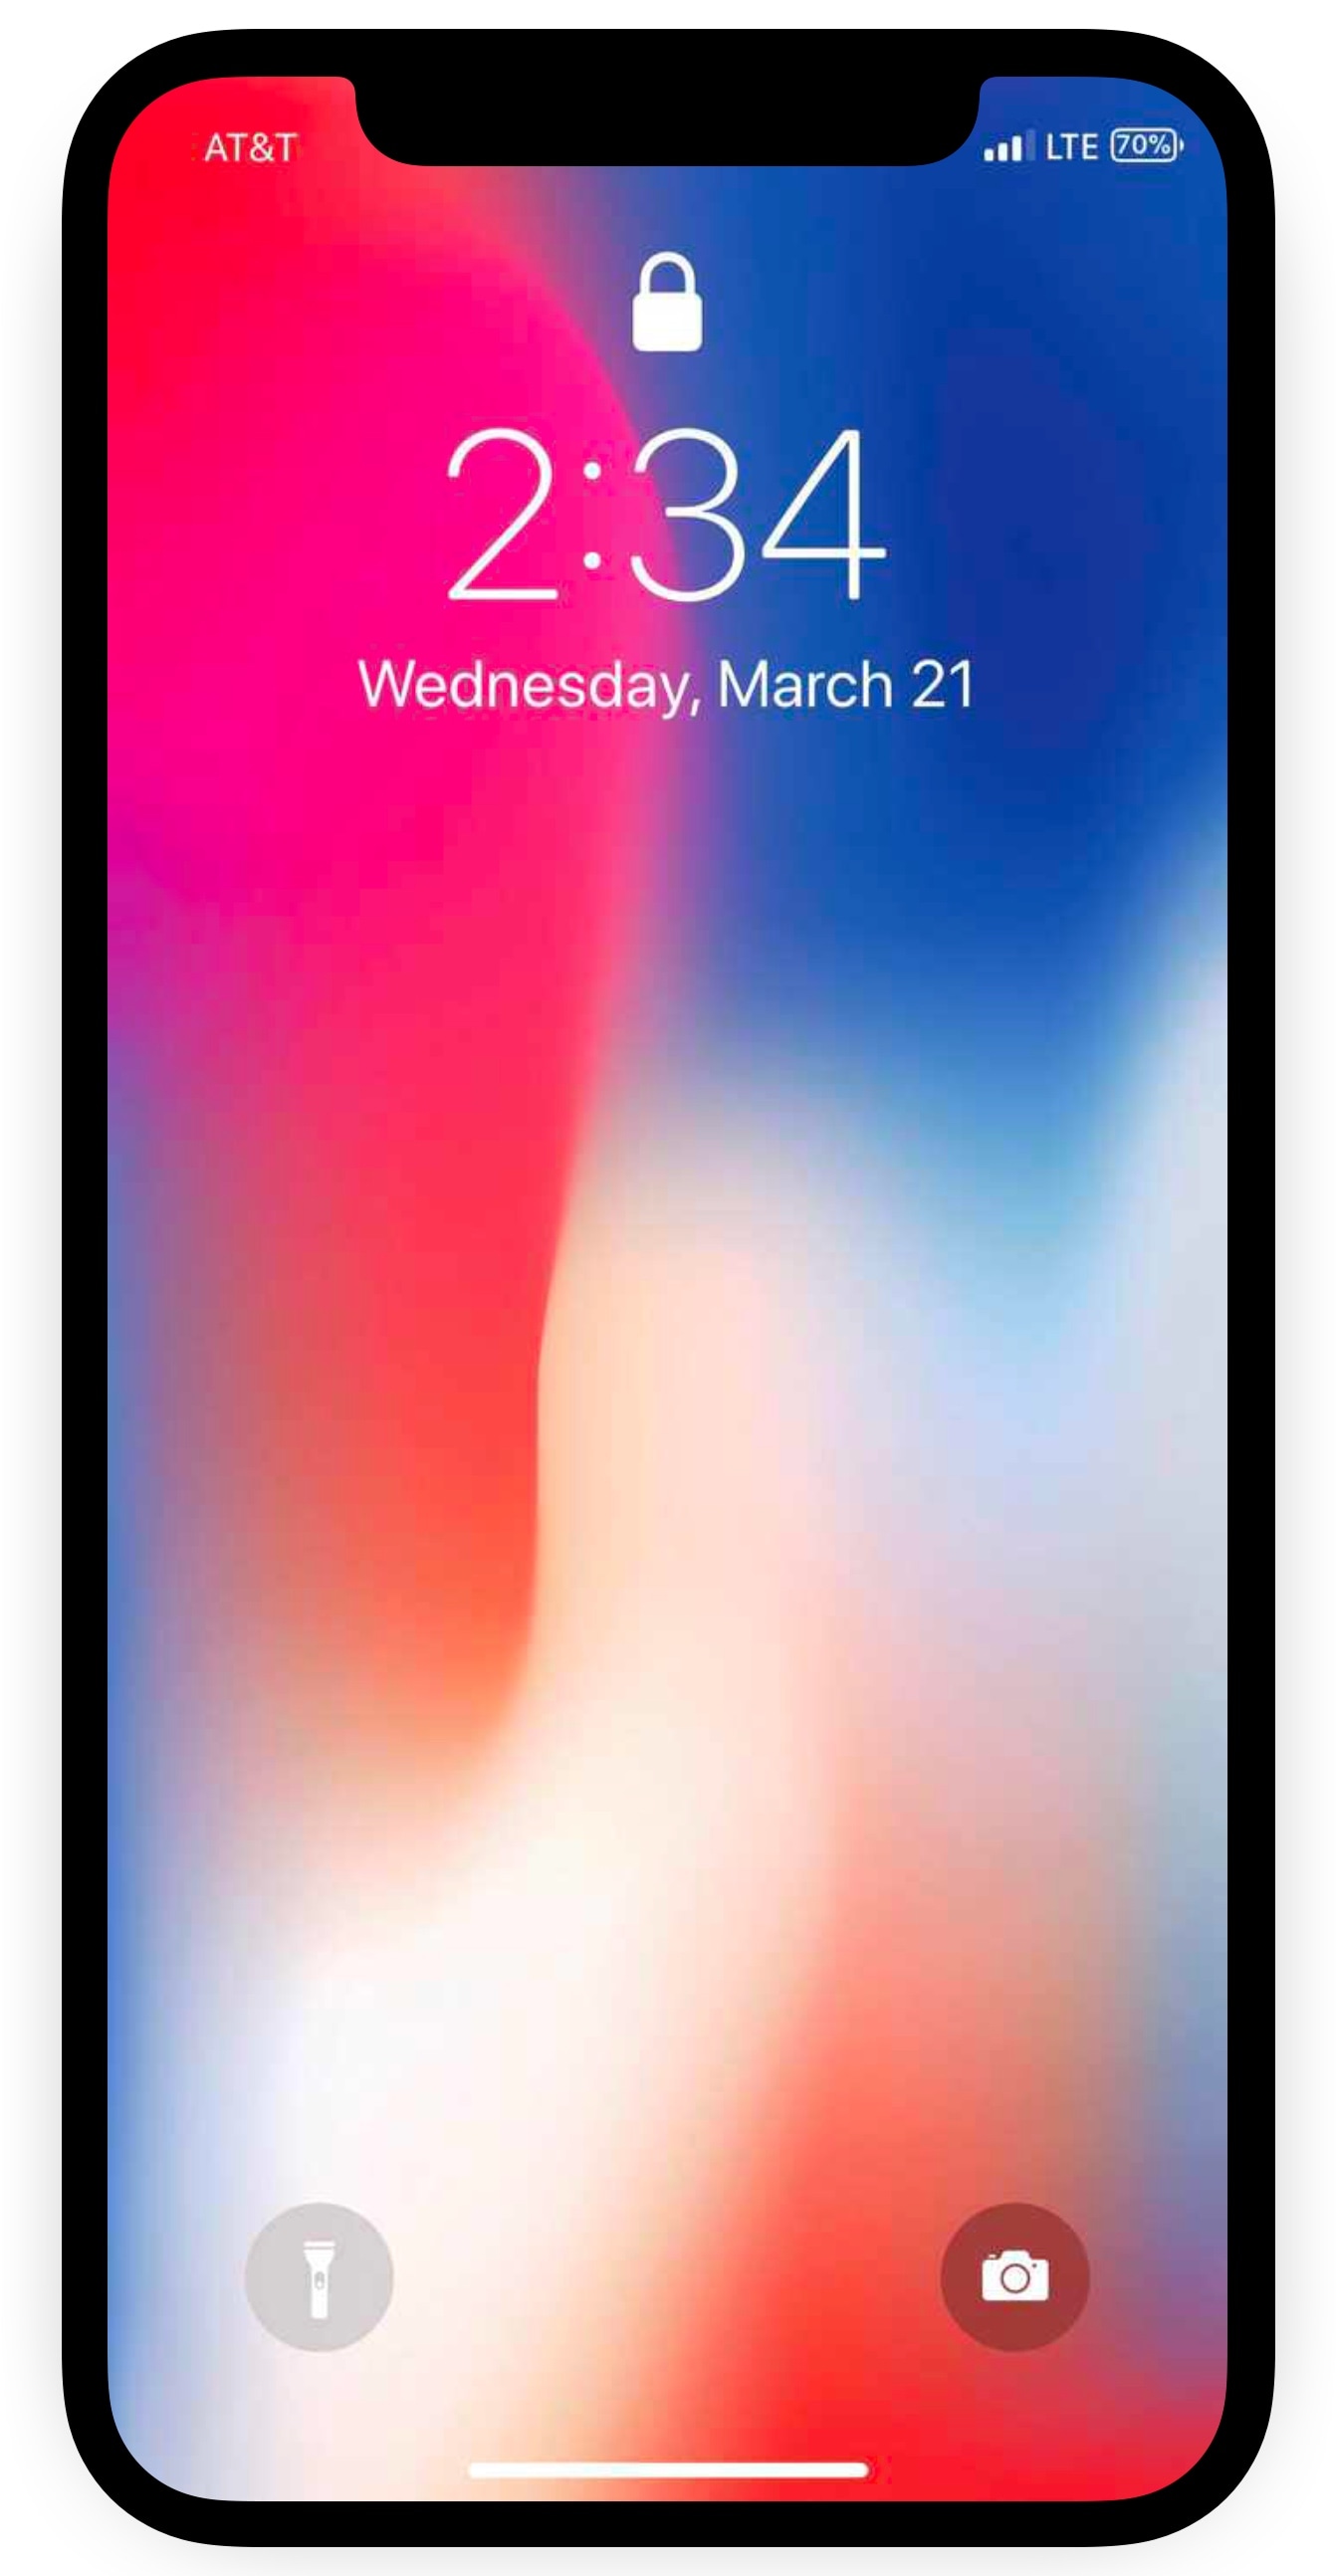 Ciro bred Gendanne This tweak improves the battery indicator on iPhone X